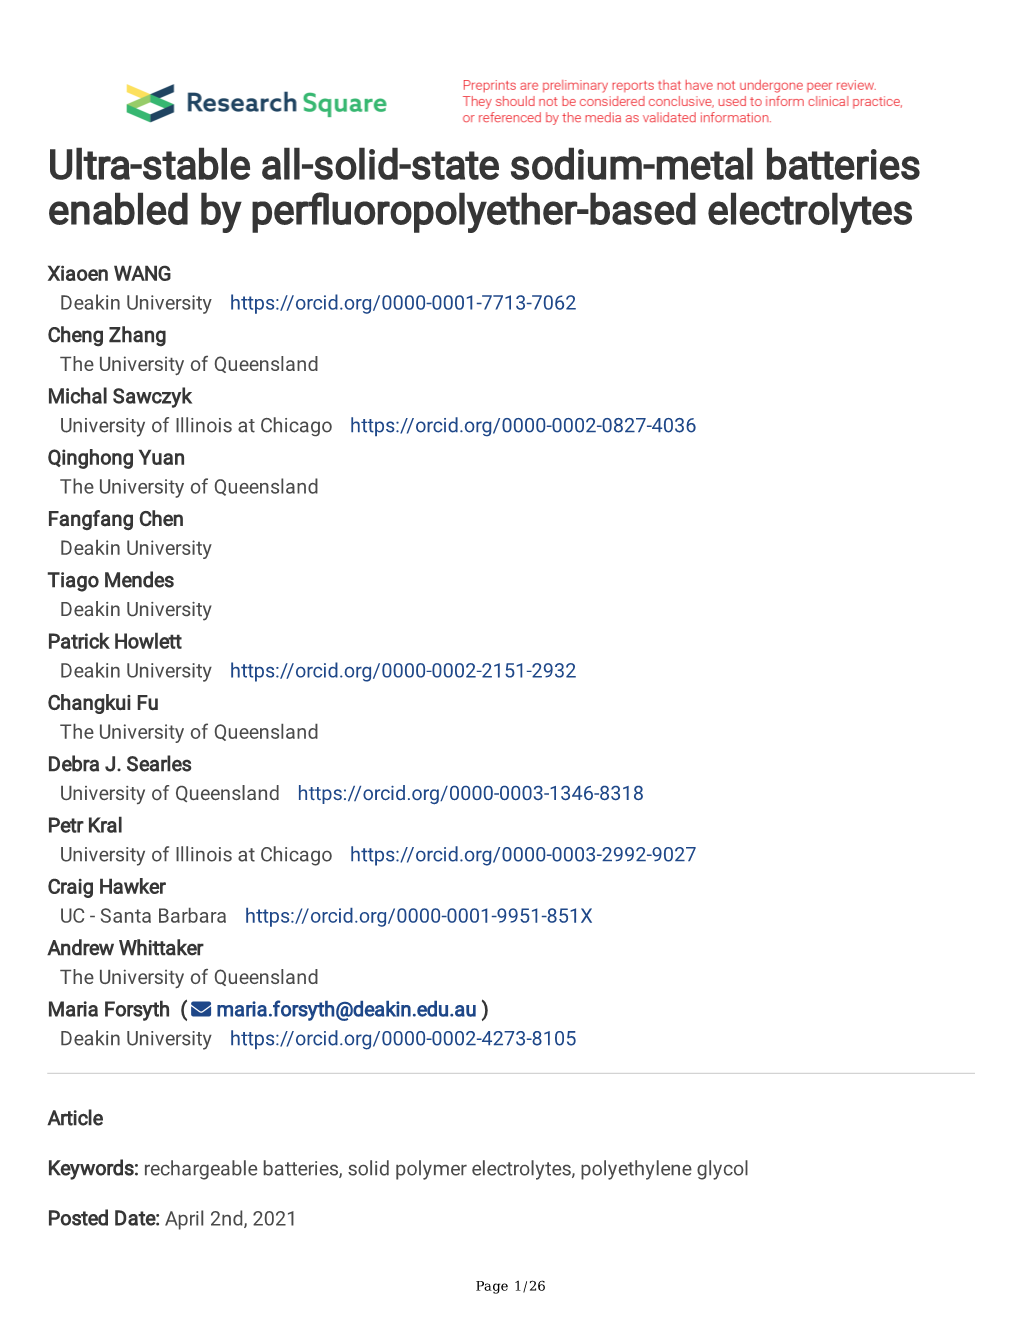 Ultra-Stable All-Solid-State Sodium-Metal Batteries Enabled by Perfuoropolyether-Based Electrolytes